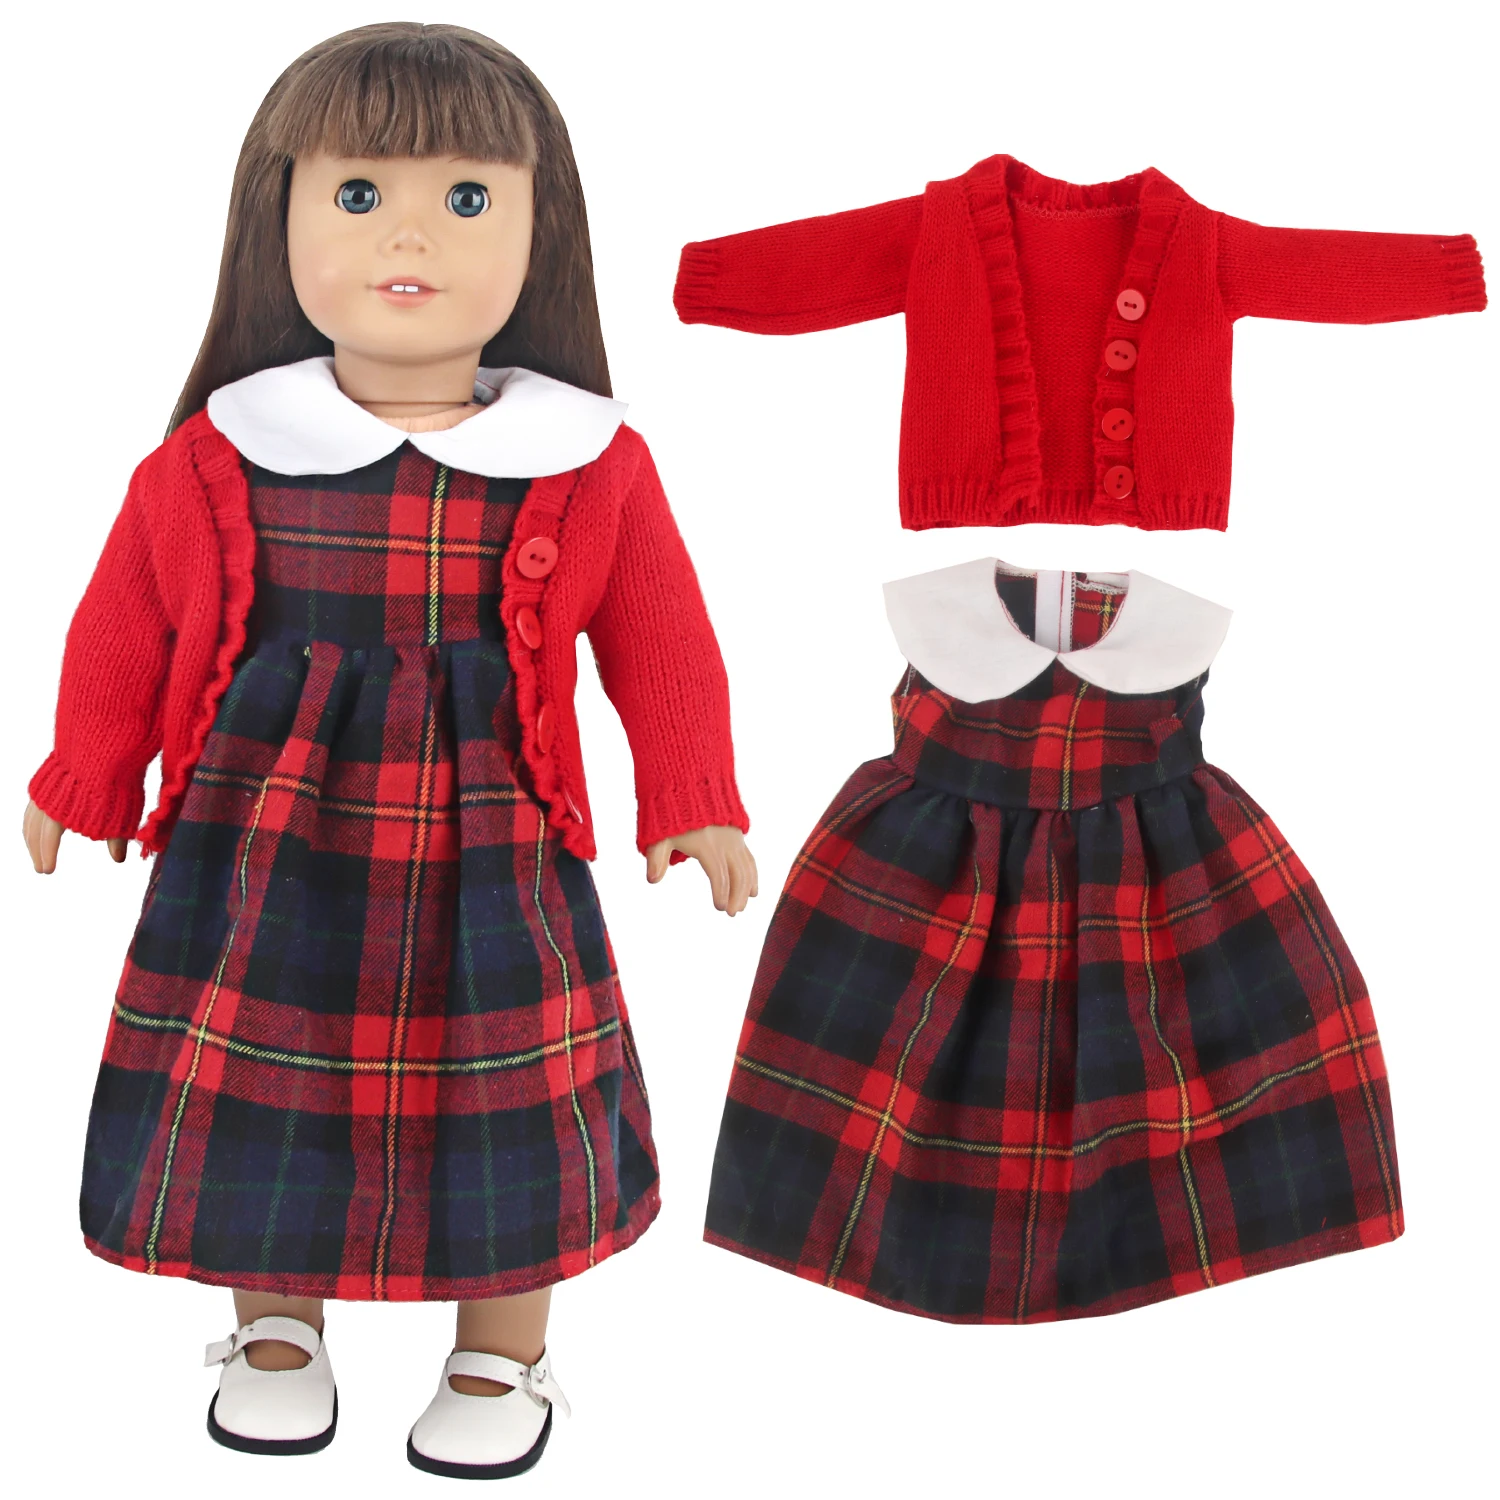 

Scottish Plaid Skirt Set For 18 Inches American Doll School Uniforms Dress+Coat Clothes Suit For 43cm Baby New Born&Og Girl doll